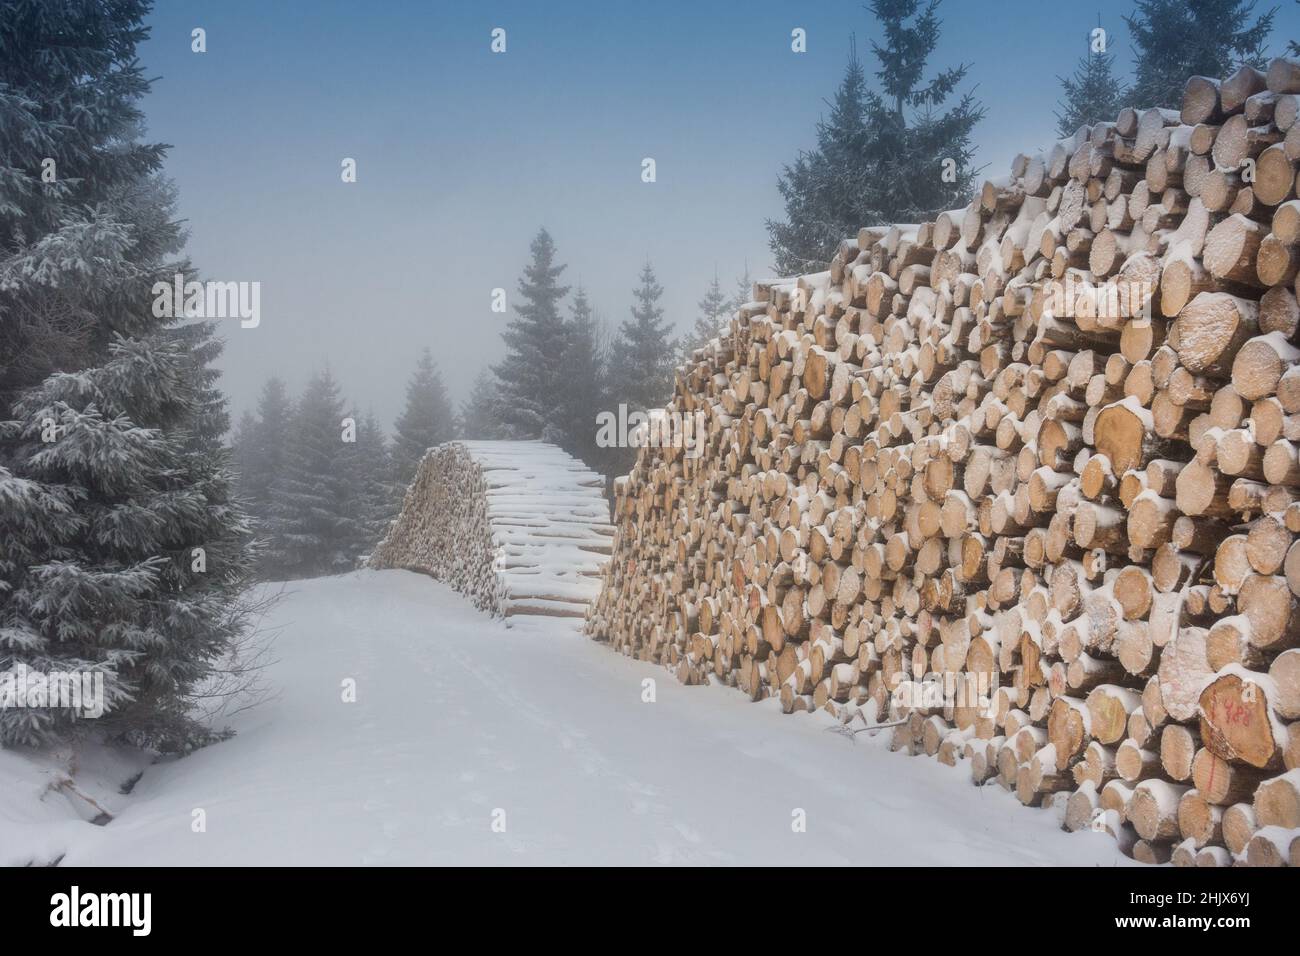 Stacked trees of the lumber industry in the snowwy Harz Mountains in Braunlage Germany. Stock Photo